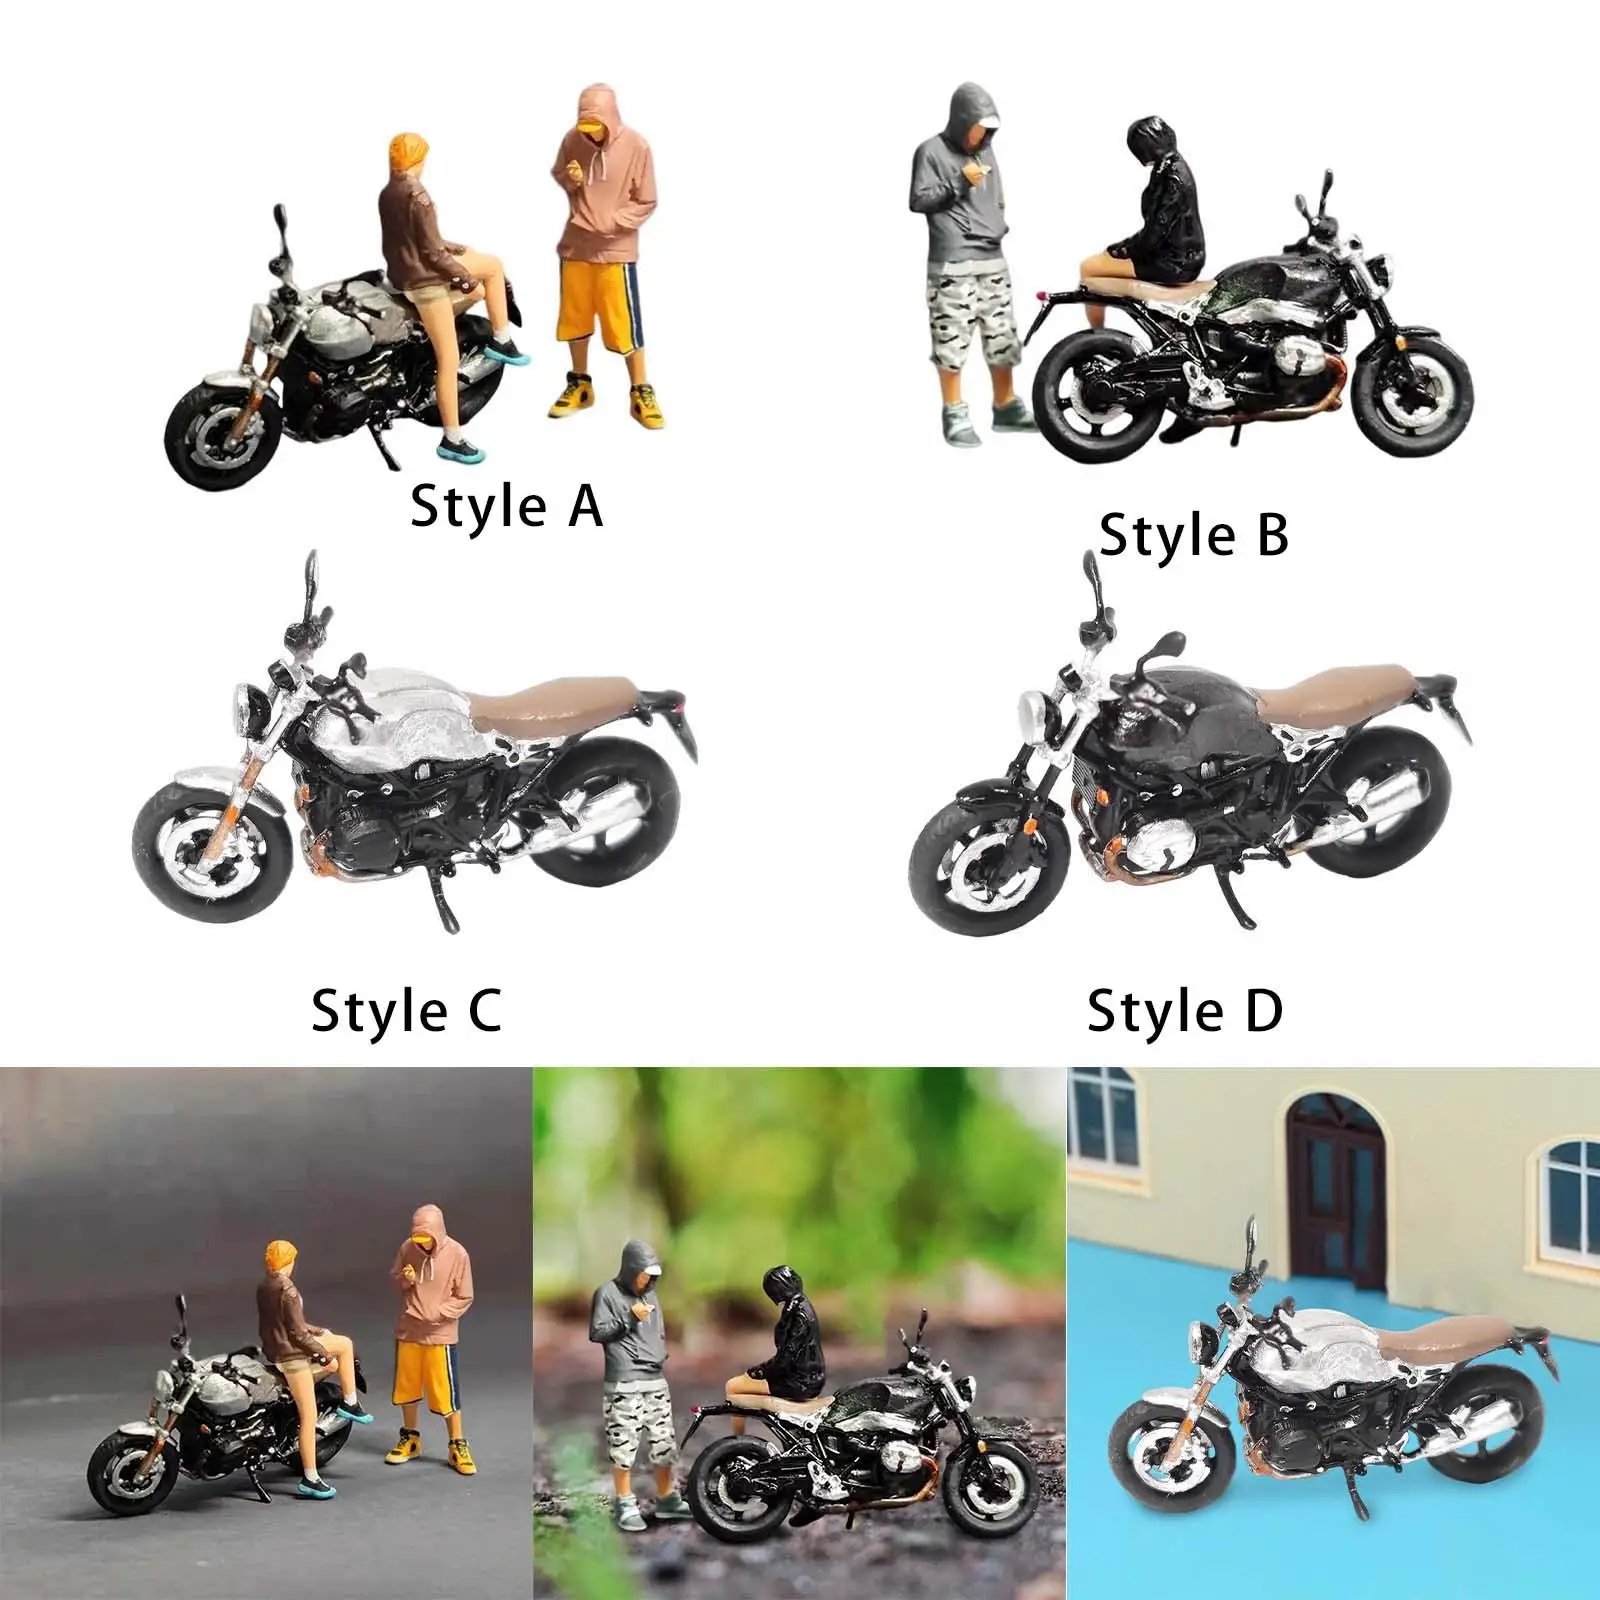 1/64 Figures Motorcycle Collections Street Scene Tiny people Model DIY Projects Miniatures Diorama Scenery Character Model Toy